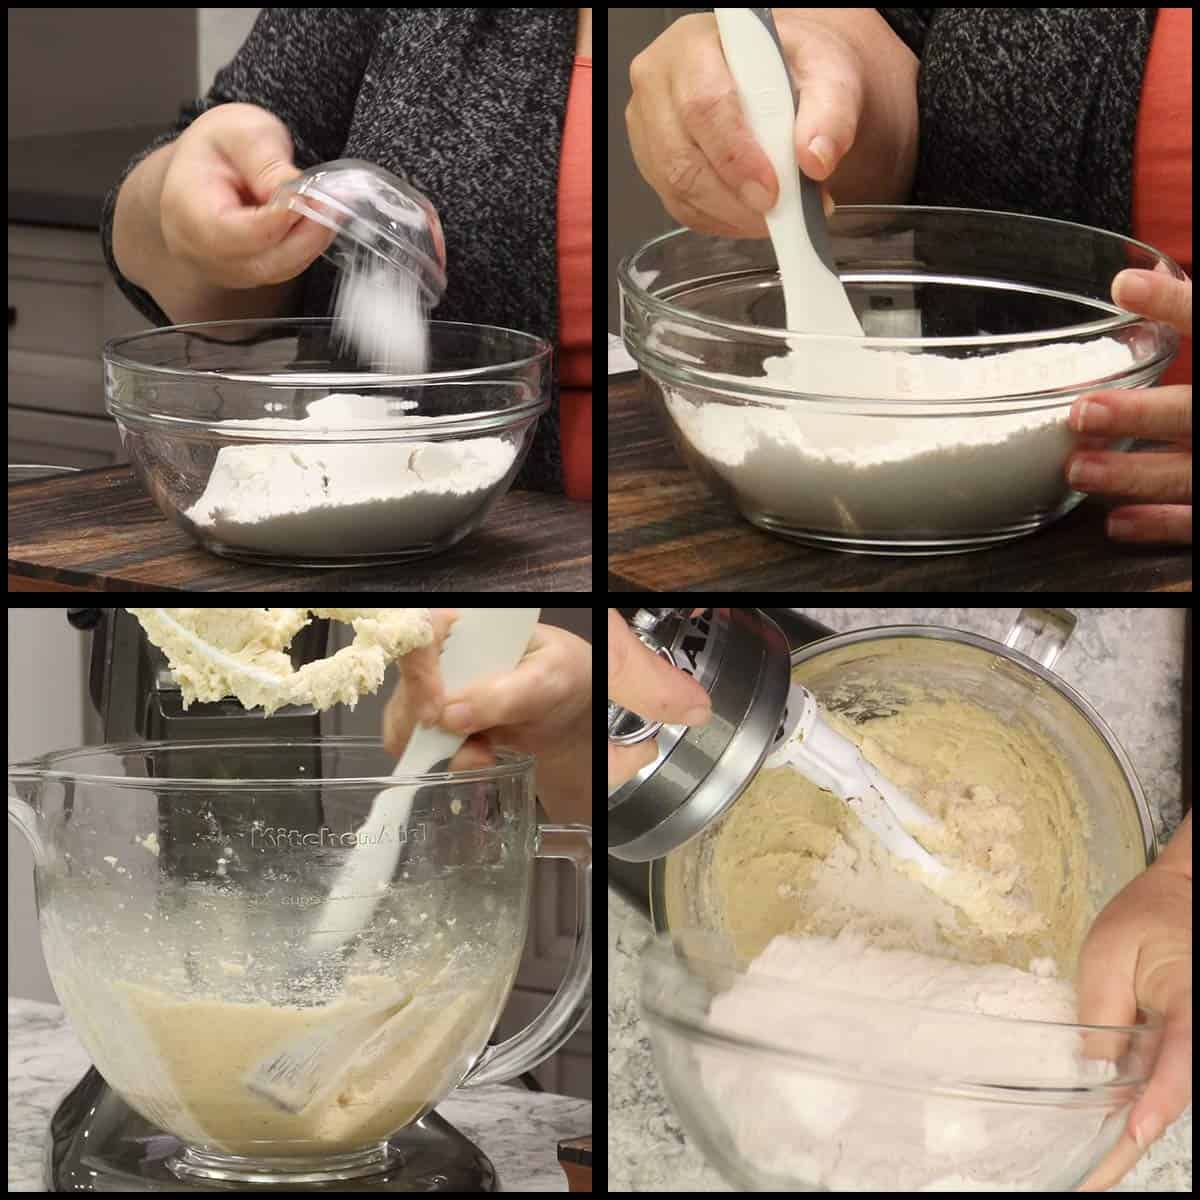 Mixing in part of the flour to the butter and sugar mixture.